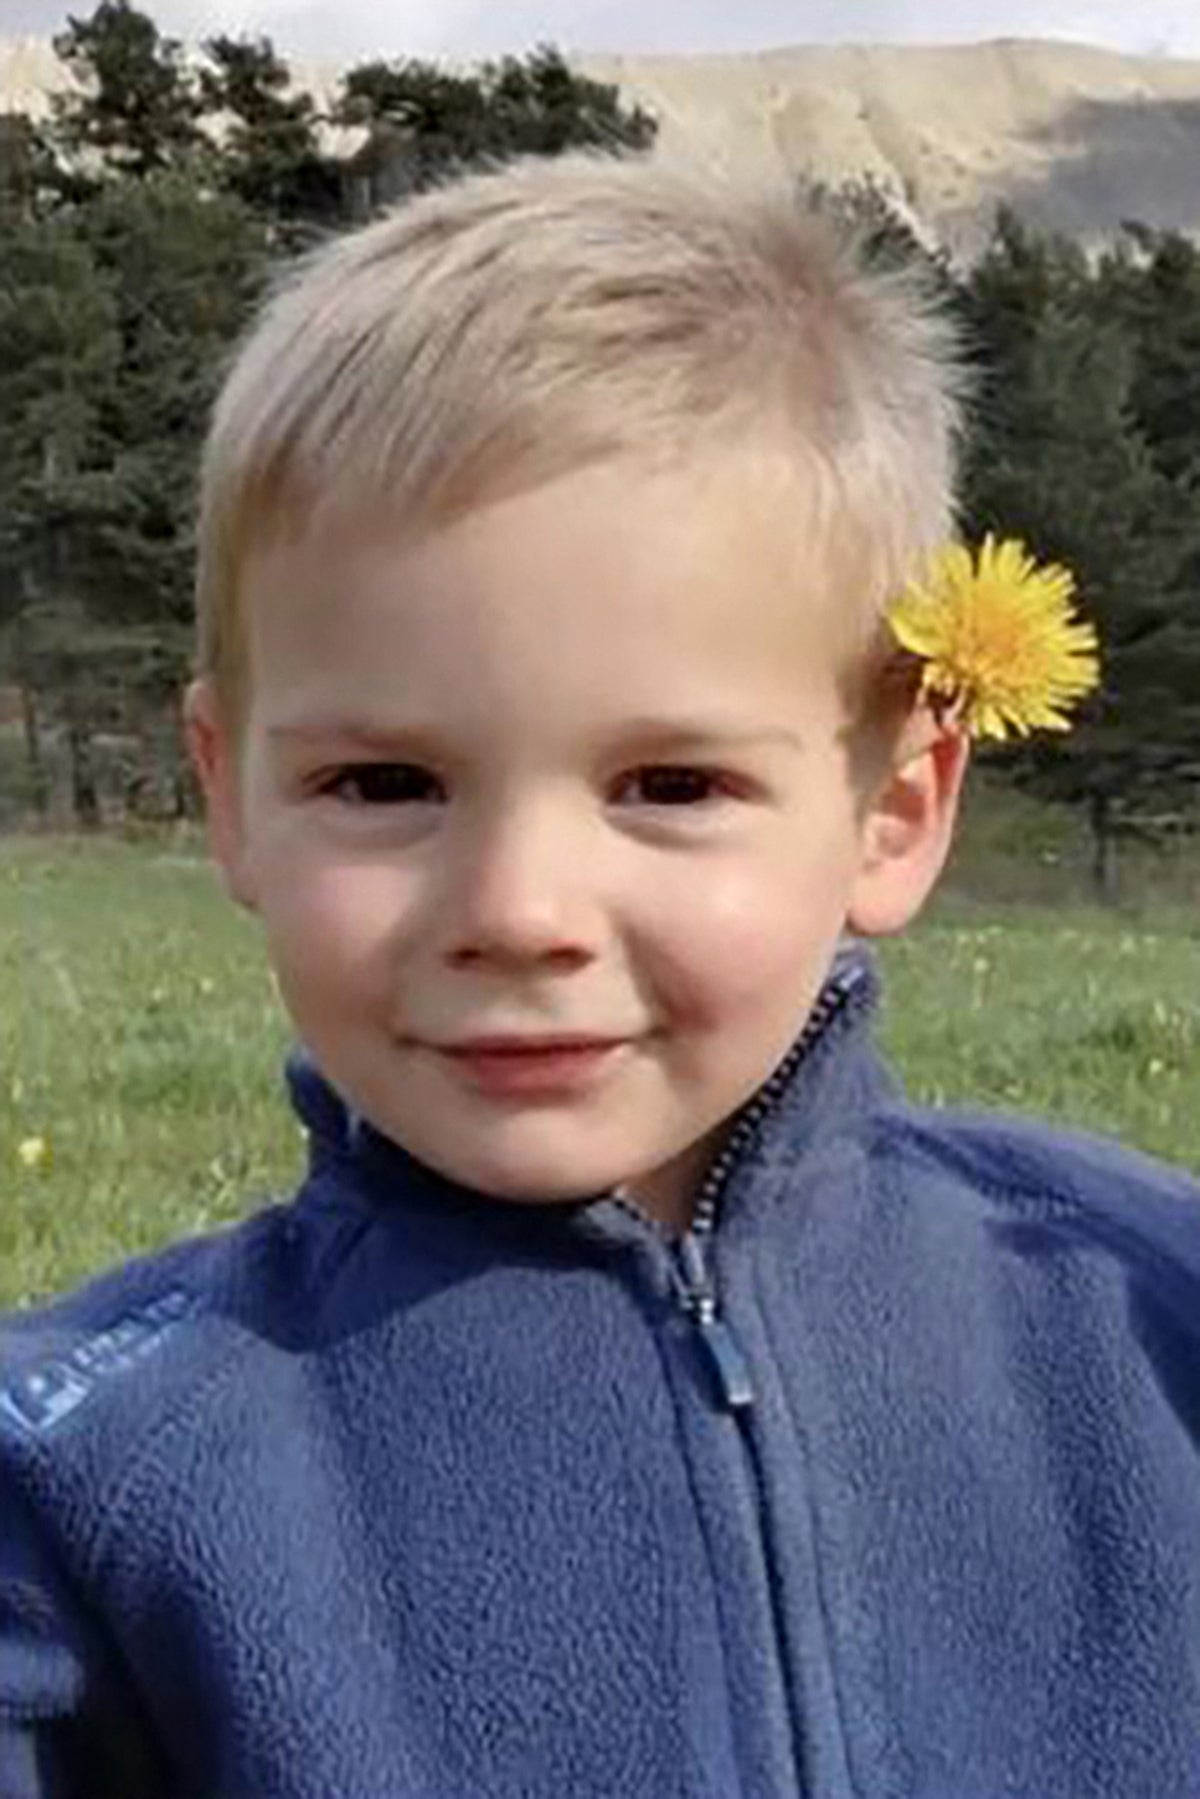 Mystery as skull of toddler who went missing eight months ago found near his grandparents’ home